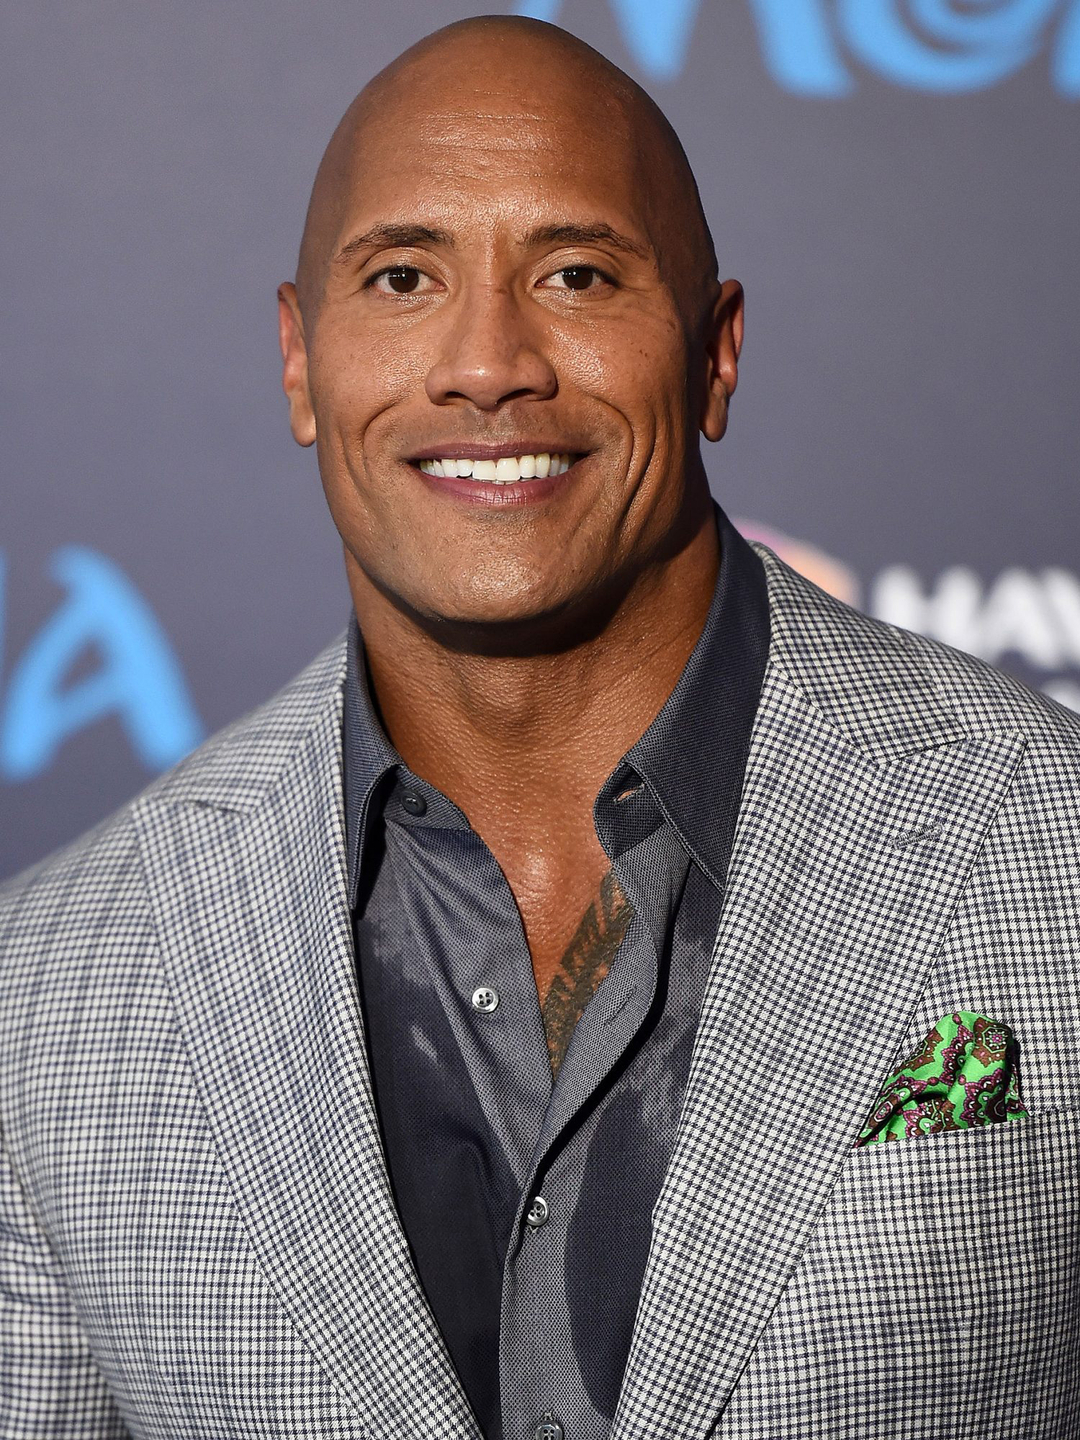 Dwayne Johnson does he have a wife